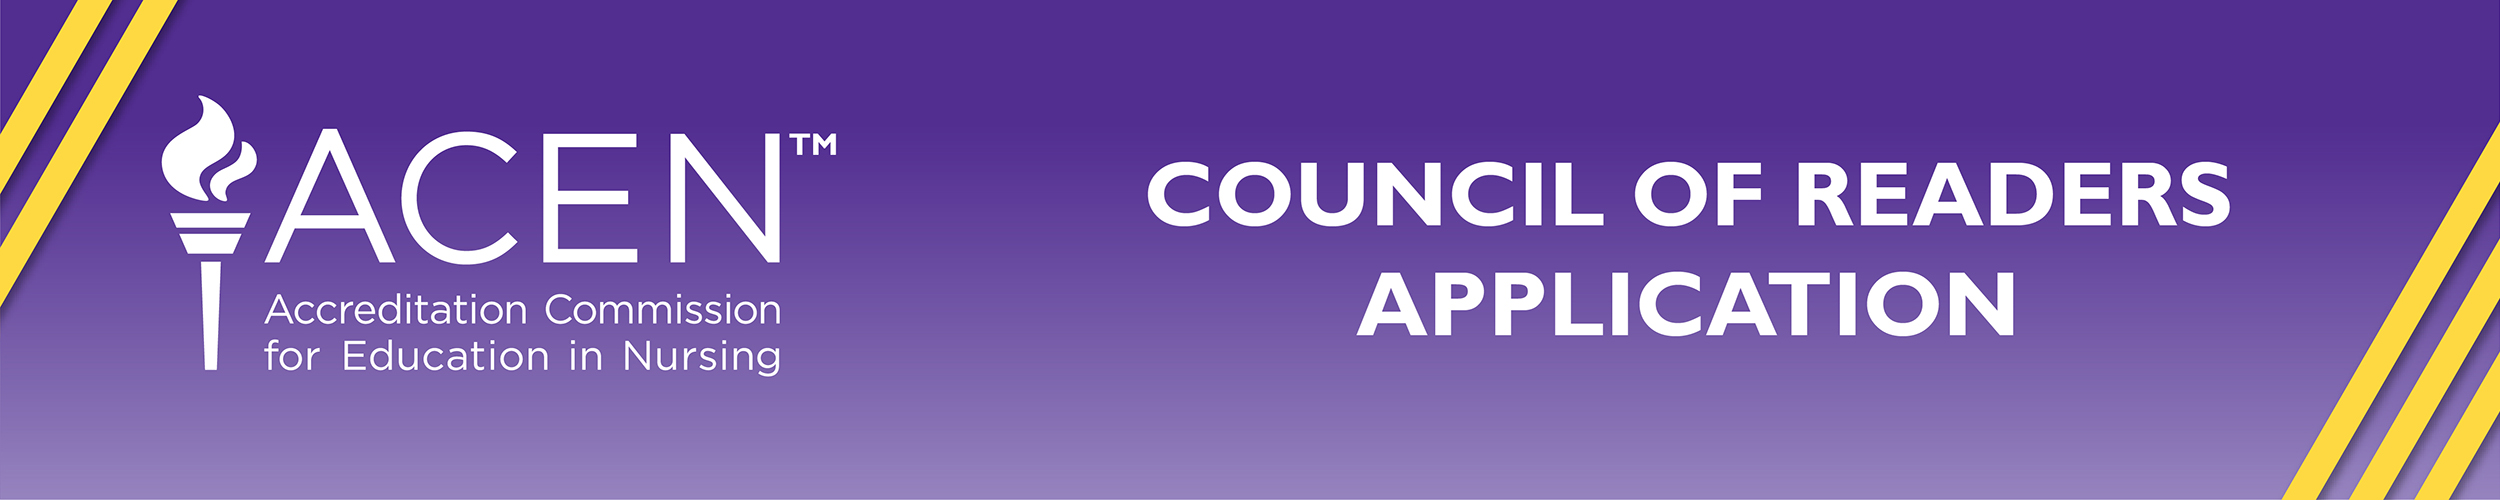 Council of Readers Application